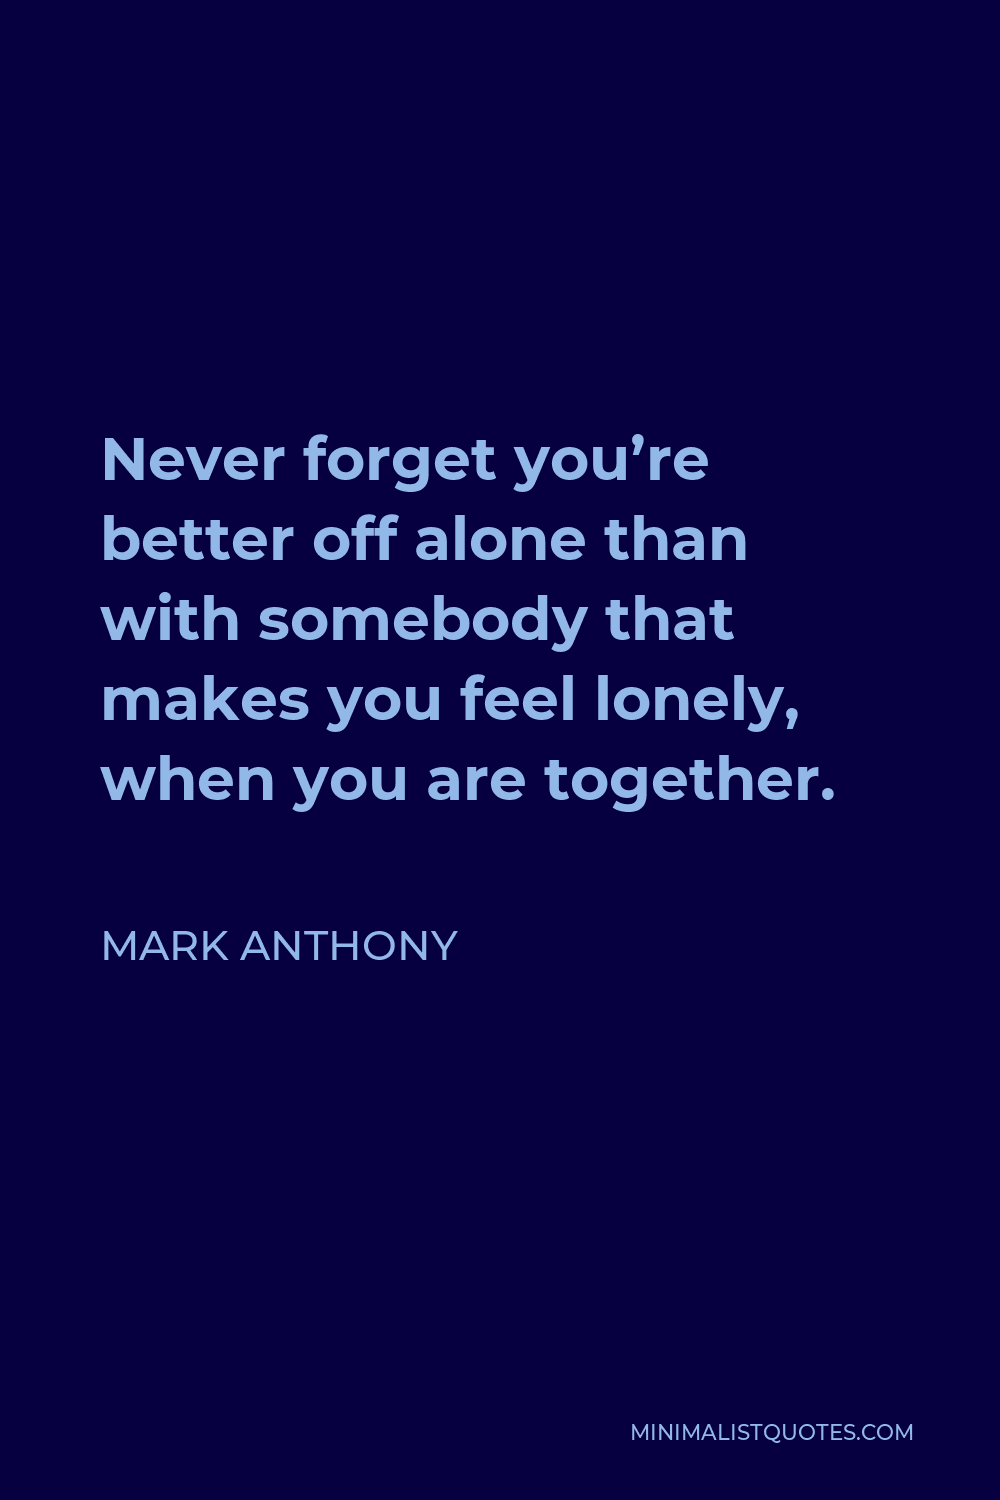 Mark Anthony Quote - Never forget you’re better off alone than with somebody that makes you feel lonely, when you are together.